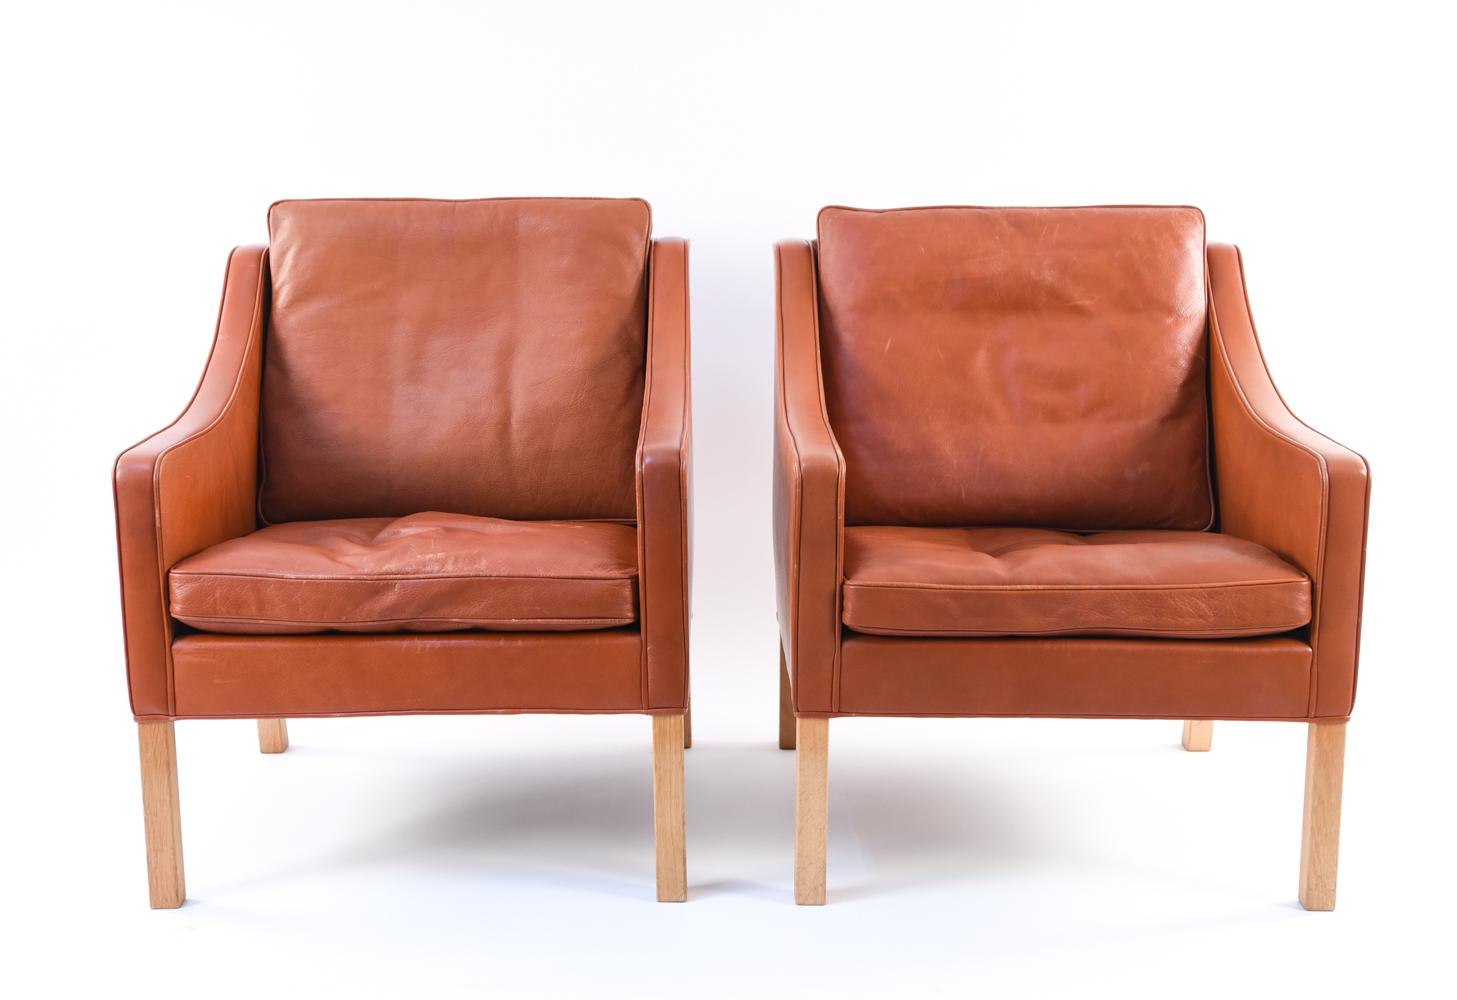 A beautiful pair of Danish midcentury lounge chairs designed by the esteemed Borge Mogensen, model 2207. These chairs are an iconic example of Scandinavian Modern design and have inspired decades of reproductions. These original chairs shows